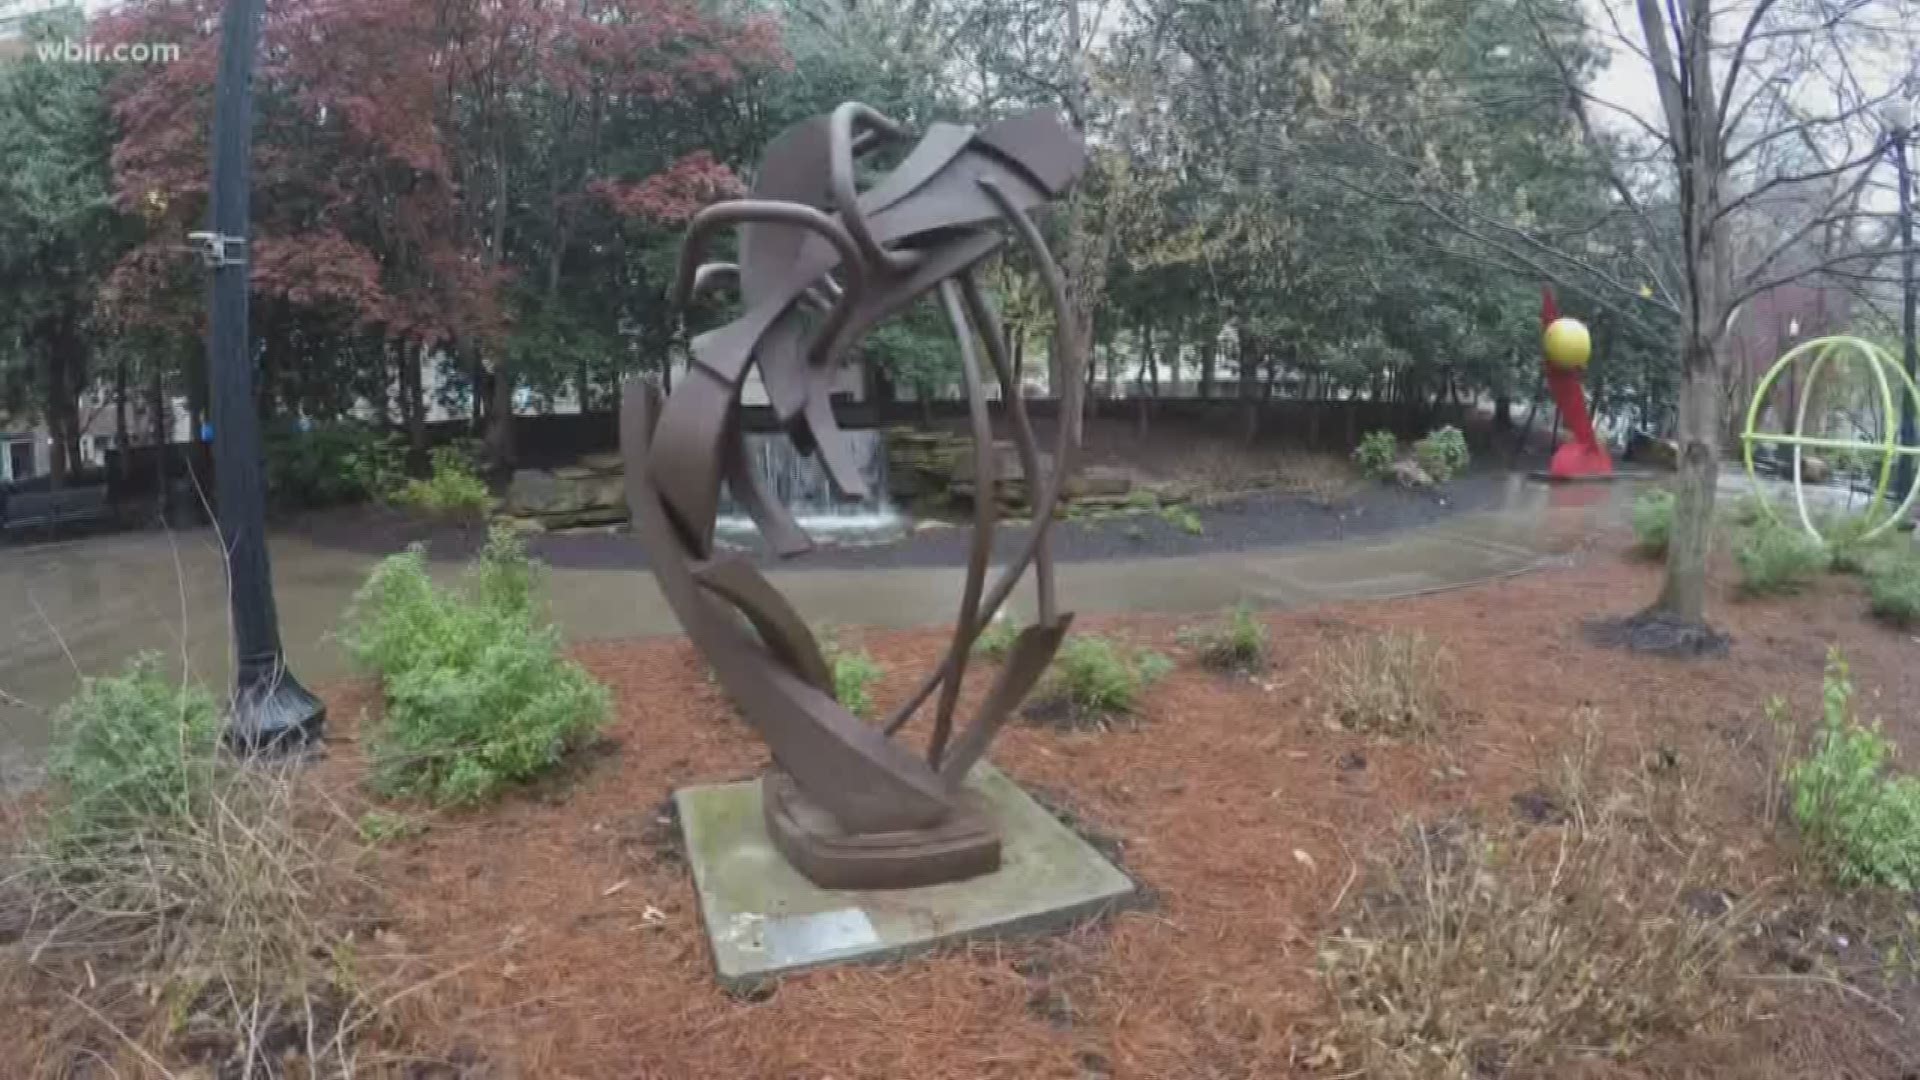 Dogwood Arts says it is an ongoing project and it hopes to install the rest of the 22 total sculptures in May.